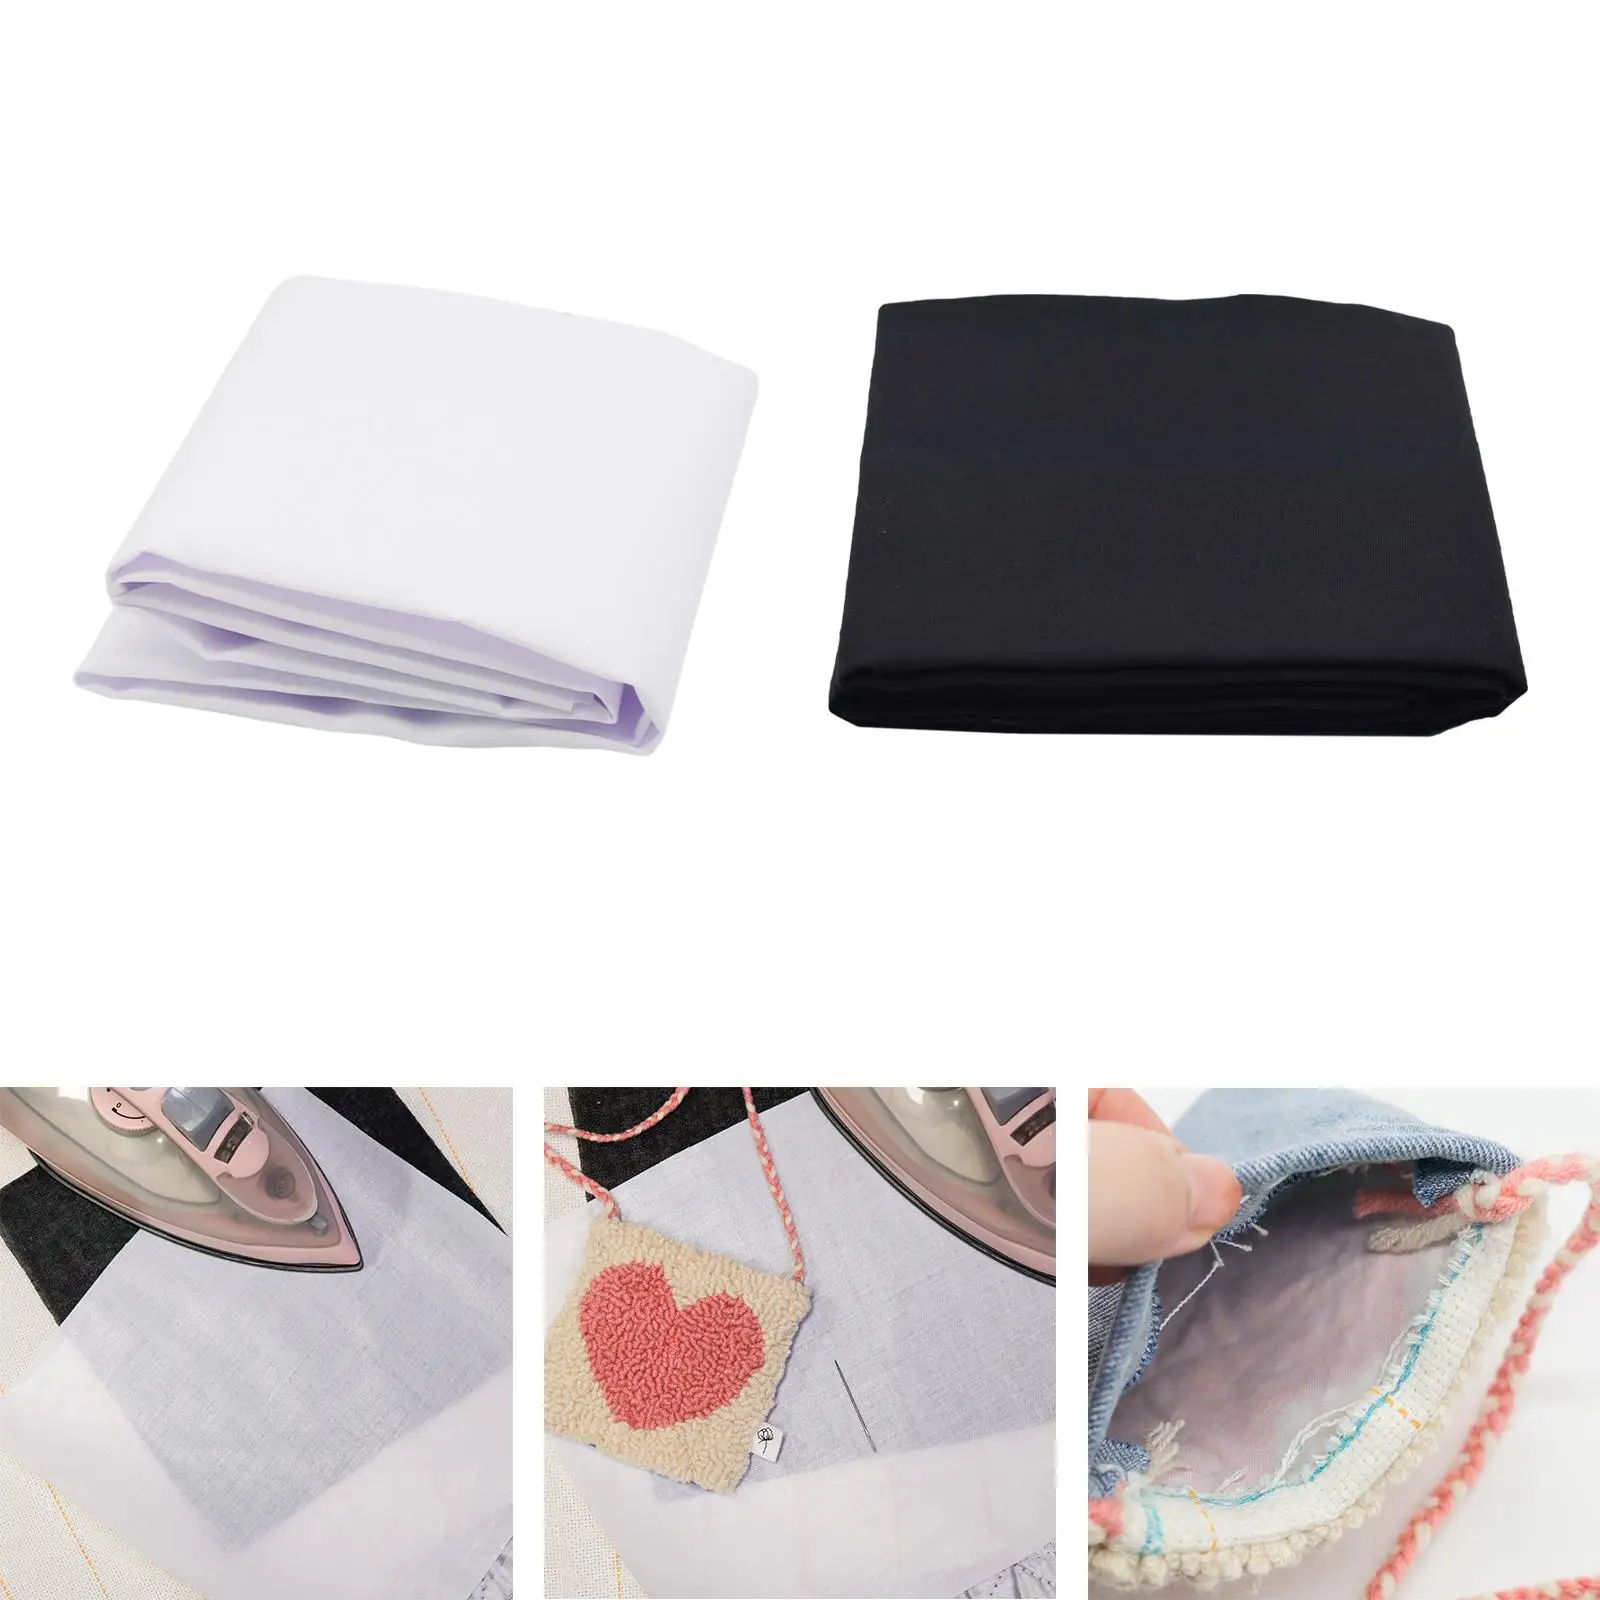 Ironing Fusible Lining Non Woven Interlining Adhesive Fabric for Tufting DIY